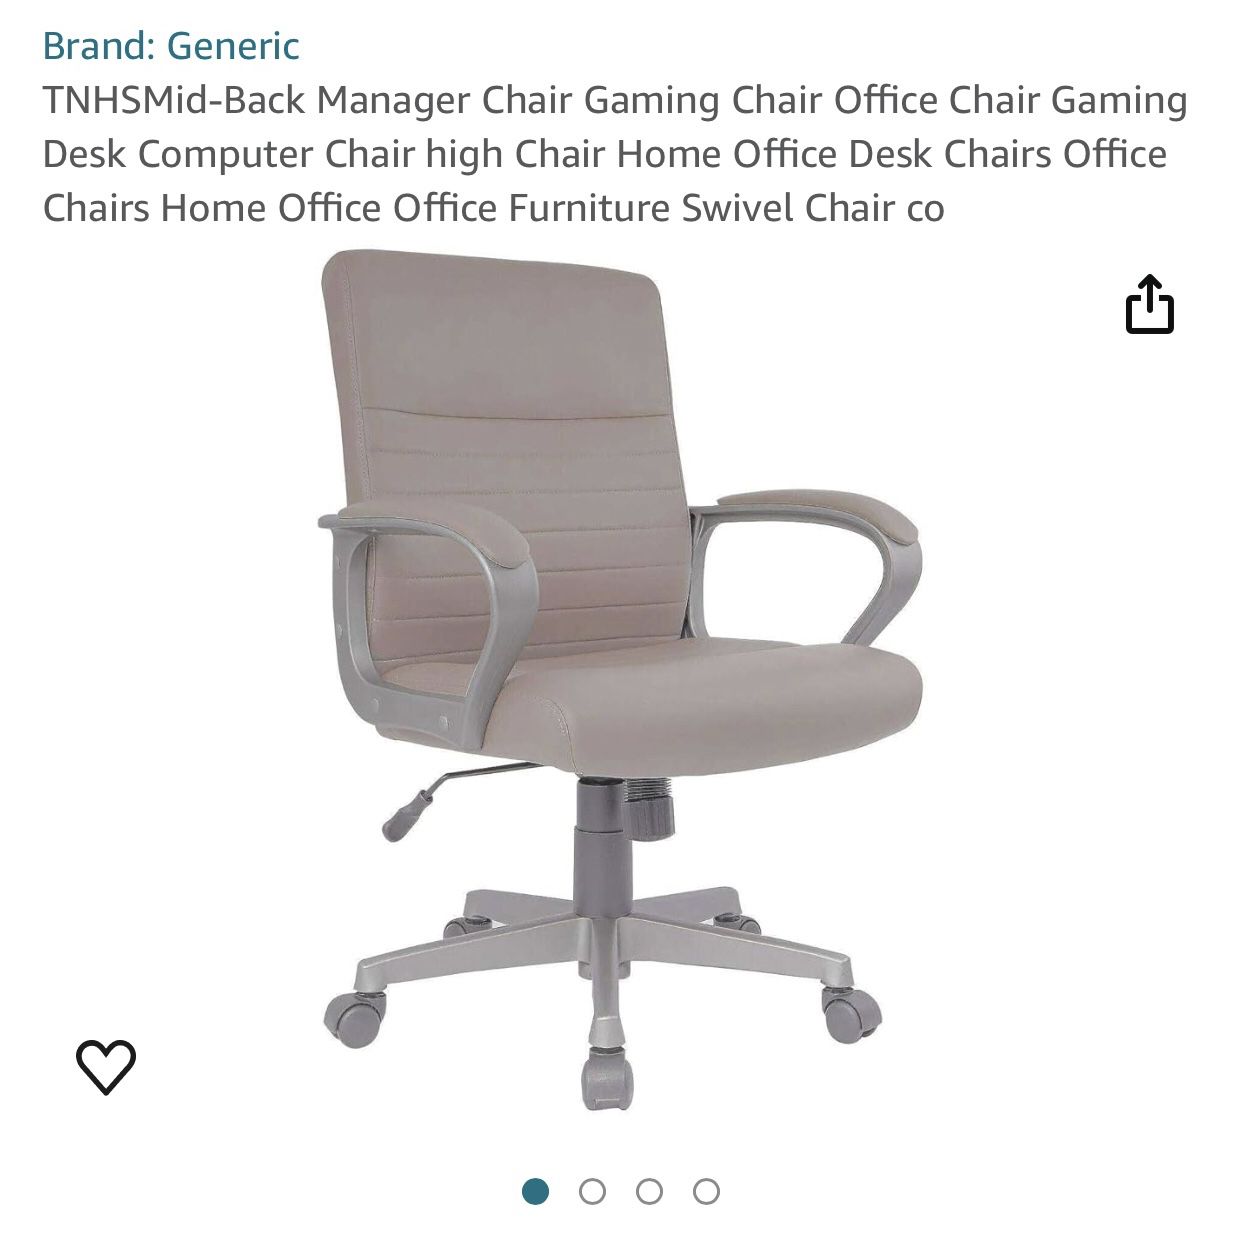 Chair Gaming Chair Office Chair Gaming 